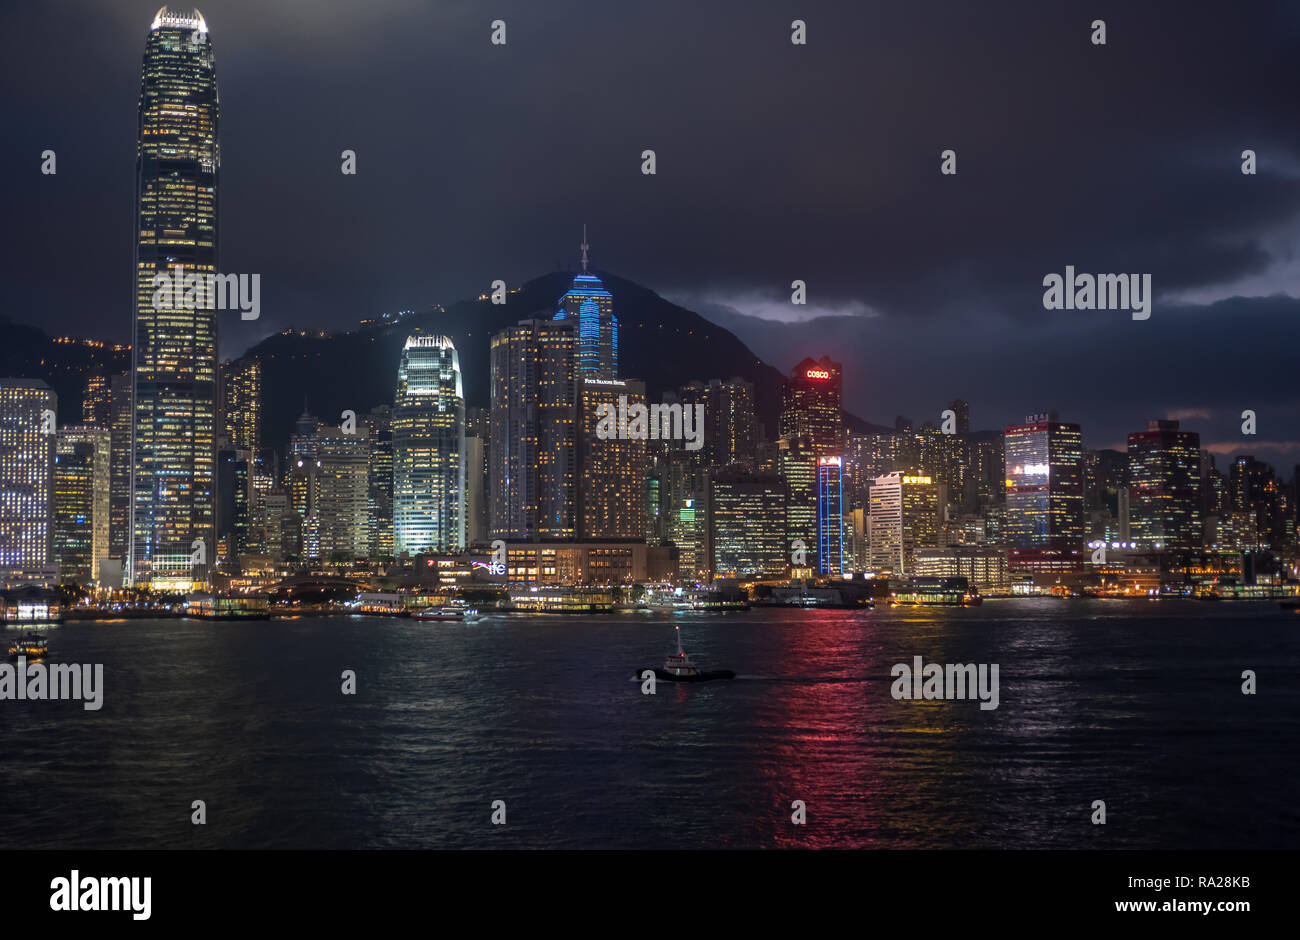 The spectacular Hong Kong skyline at night with the towers of Central District and Sheung Wan appearing to rise up to the Peak in the background Stock Photo